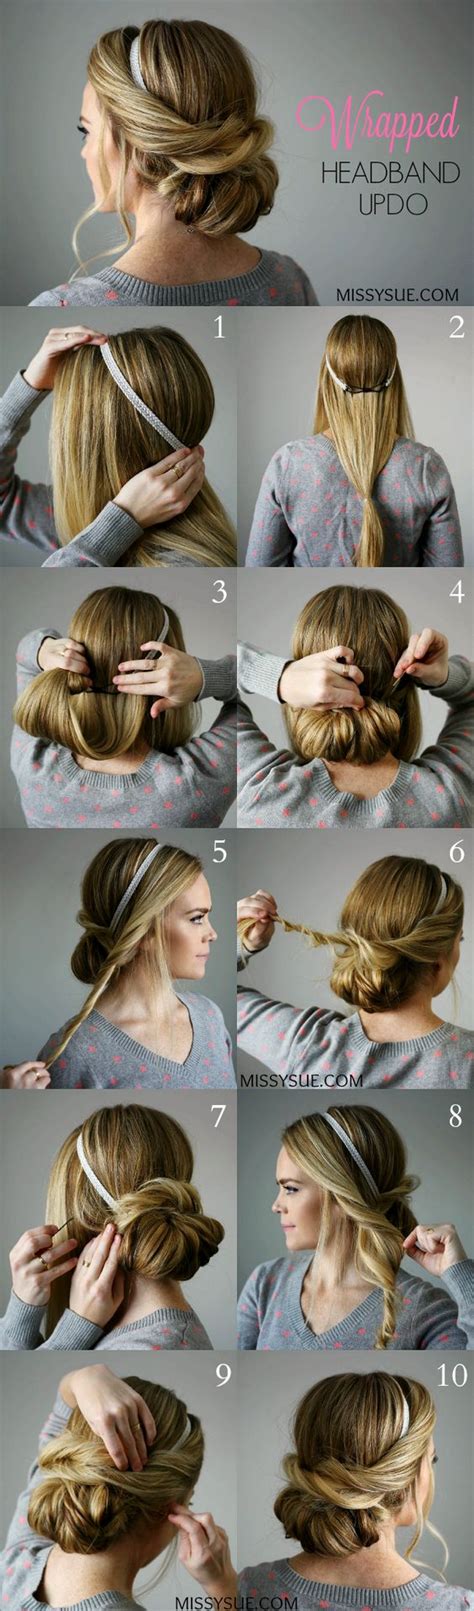 The Beginner Easy Updos For Long Hair Step By Step For Long Hair